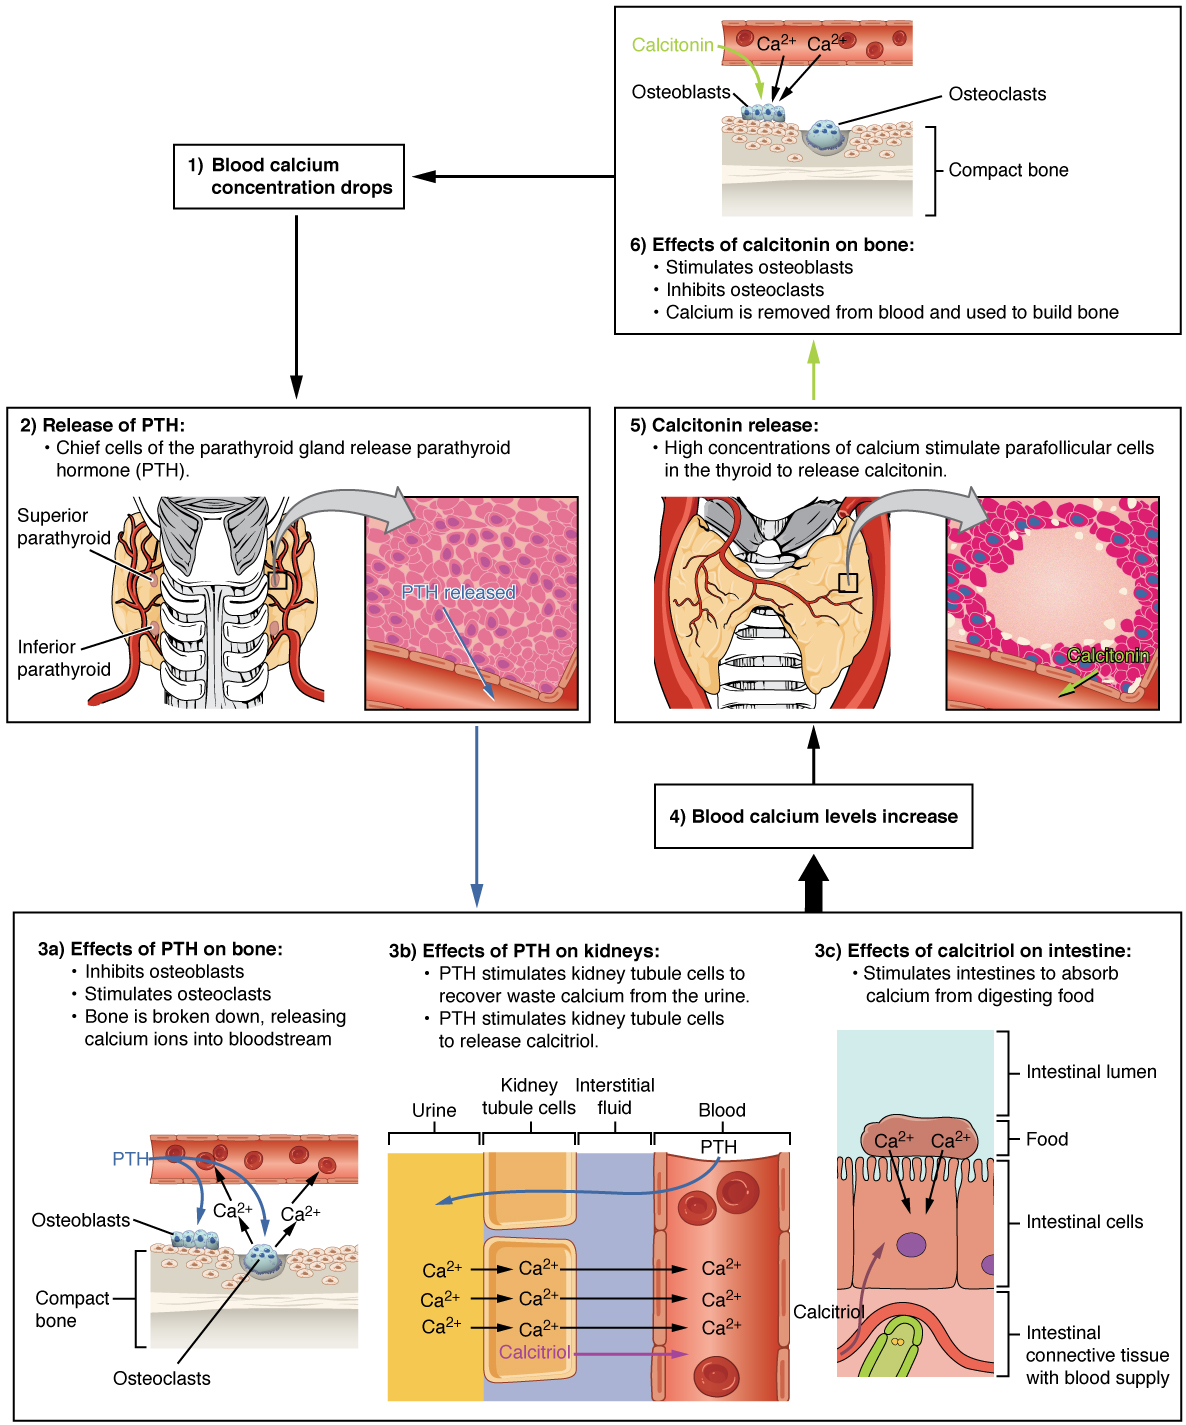 This diagram shows the role of parathyroid hormone in maintaining blood calcium homeostasis. When blood calcium concentration drops, chief cells of the parathyroid gland release parathyroid hormone (PTH). PTH affects bone, the kidneys and the intestines. In regards to bone, PTH inhibits osteoblasts and stimulates osteoclasts. This results in compact bone being broken down, as illustrated by an osteoclast burrowing into the surface of a bone. The break down releases calcium ions into a nearby blood vessel. The osteoblasts are inactive in this stage. In regards to the kidneys, PTH stimulates kidney tubule cells to recover waste calcium from the urine. PTH also stimulates kidney tubule cells to release calcitrol. This is illustrated with a cross section of a kidney tubule, showing the cells of the tubule wall. Urine is running to the left of the tubule wall cells while an artery is to the right. The right edge of the tubule wall cells and the left edge of the artery are separated by a small region of interstitial space. The cells are removing calcium from the urine and pumping it into the interstitial fluid, after which the calcium enters the artery. The cells are also pumping calcitrol into the blood vessel. In regards to the intestine, PTH stimulates the intestines to absorb calcium from digesting food. A cross section of an intestinal cell is shown, which is cube-shaped but with finger-like projections on the intestinal lumen side (top). Beneath the intestinal cell is an artery. Calcitrol is leaving the artery and entering the intestinal cell, stimulating it to absorb calcium from food in the intestinal lumen. The effects of PTH on bone, the kidneys and the intestines all cause blood calcium levels to increase. High calcium concentrations in the blood stimulate the parafollicular cells in the thyroid to release calcitonin. Calcitonin reverses the effects of PTH by stimulating osteoblasts and inhibiting osteoclasts in bone tissue. This is illustrated by calcium ions leaving a blood vessel and traveling to osteoblasts on a section of compact bone. The osteoblasts are thickening the compact bone layer while, in this stage, the osteoclasts are inactive.